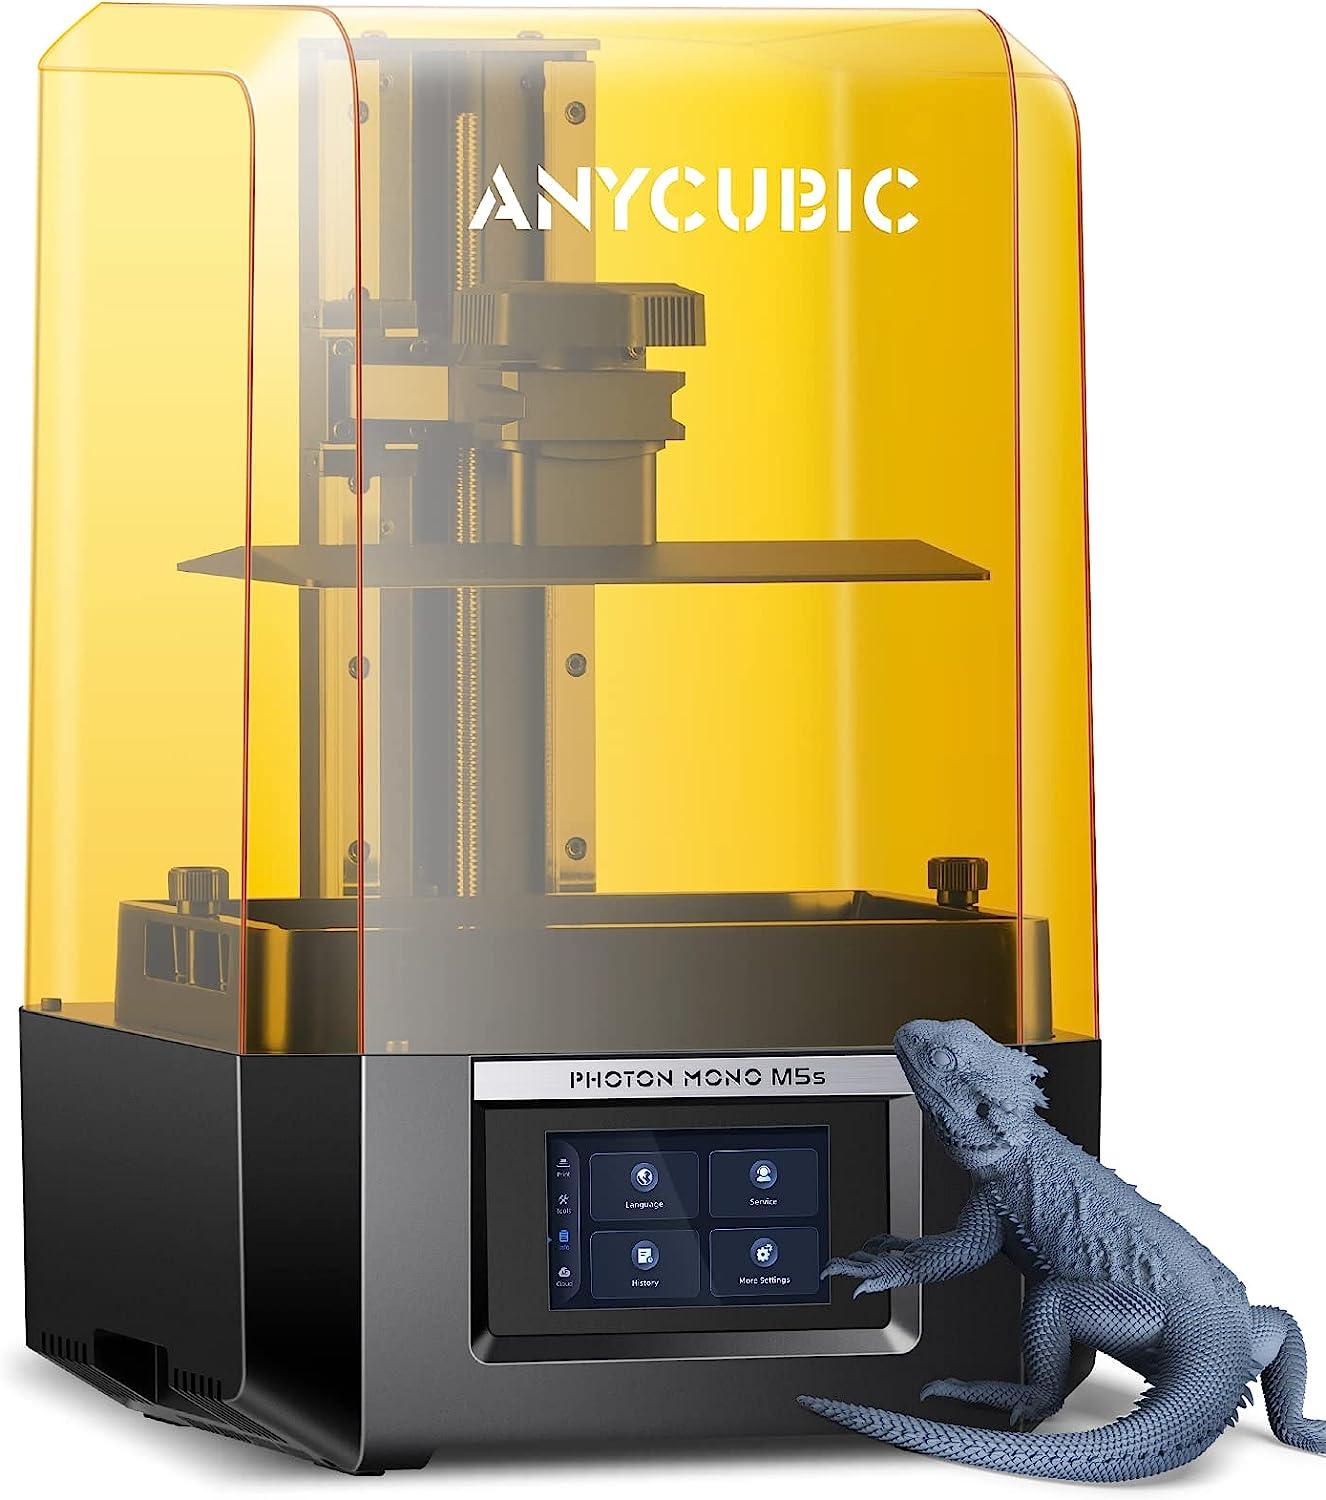 Anycubic Launches the Photon Mono M5s: The First Consumer Grade